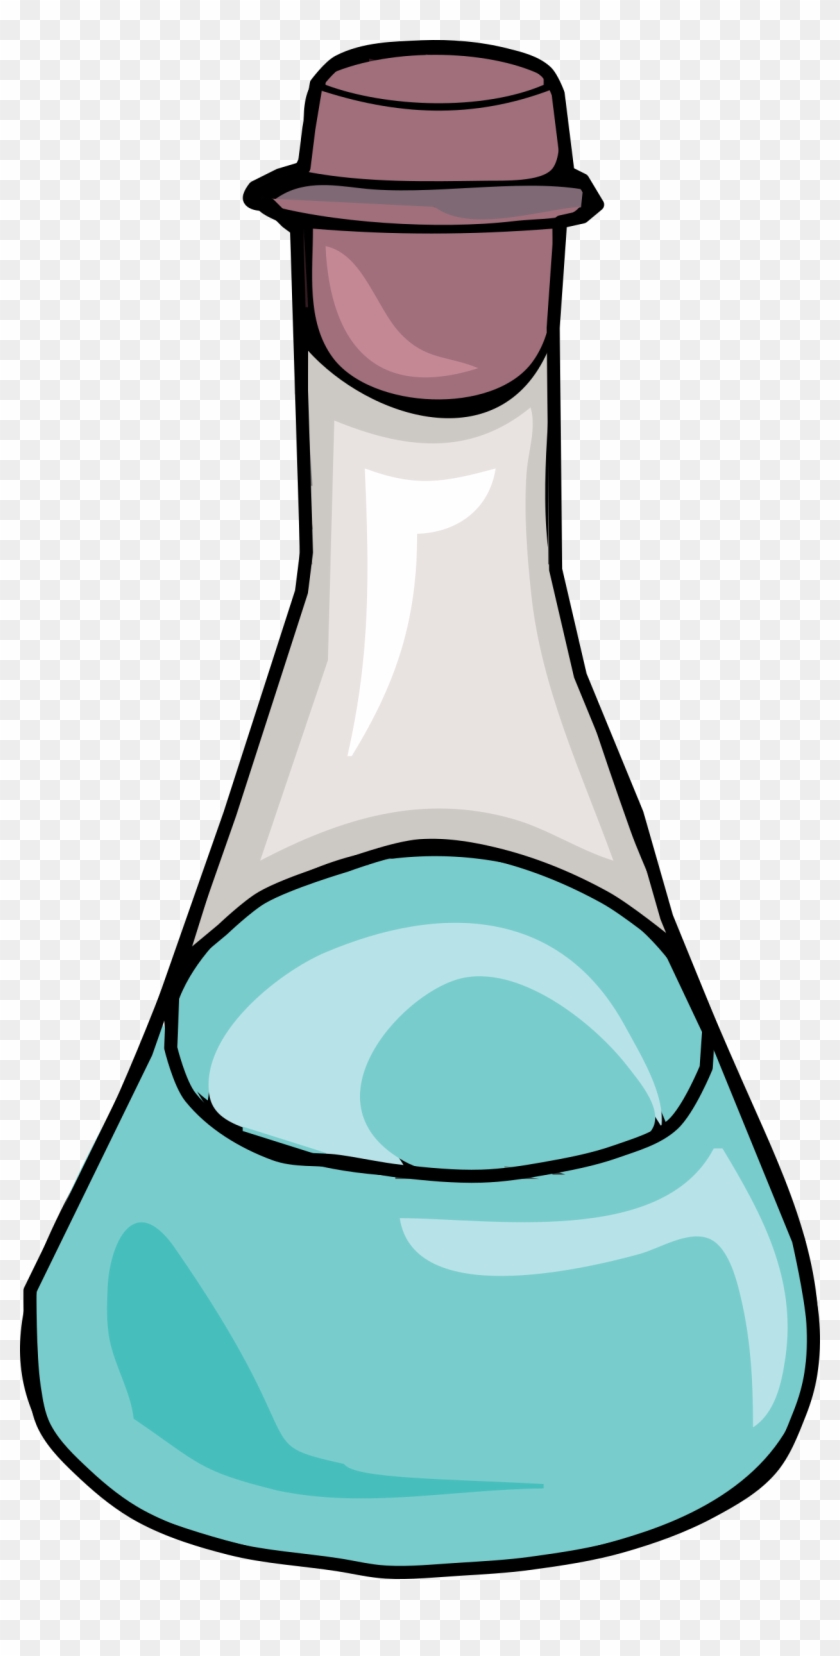 This Free Icons Png Design Of Science Flask Clipart